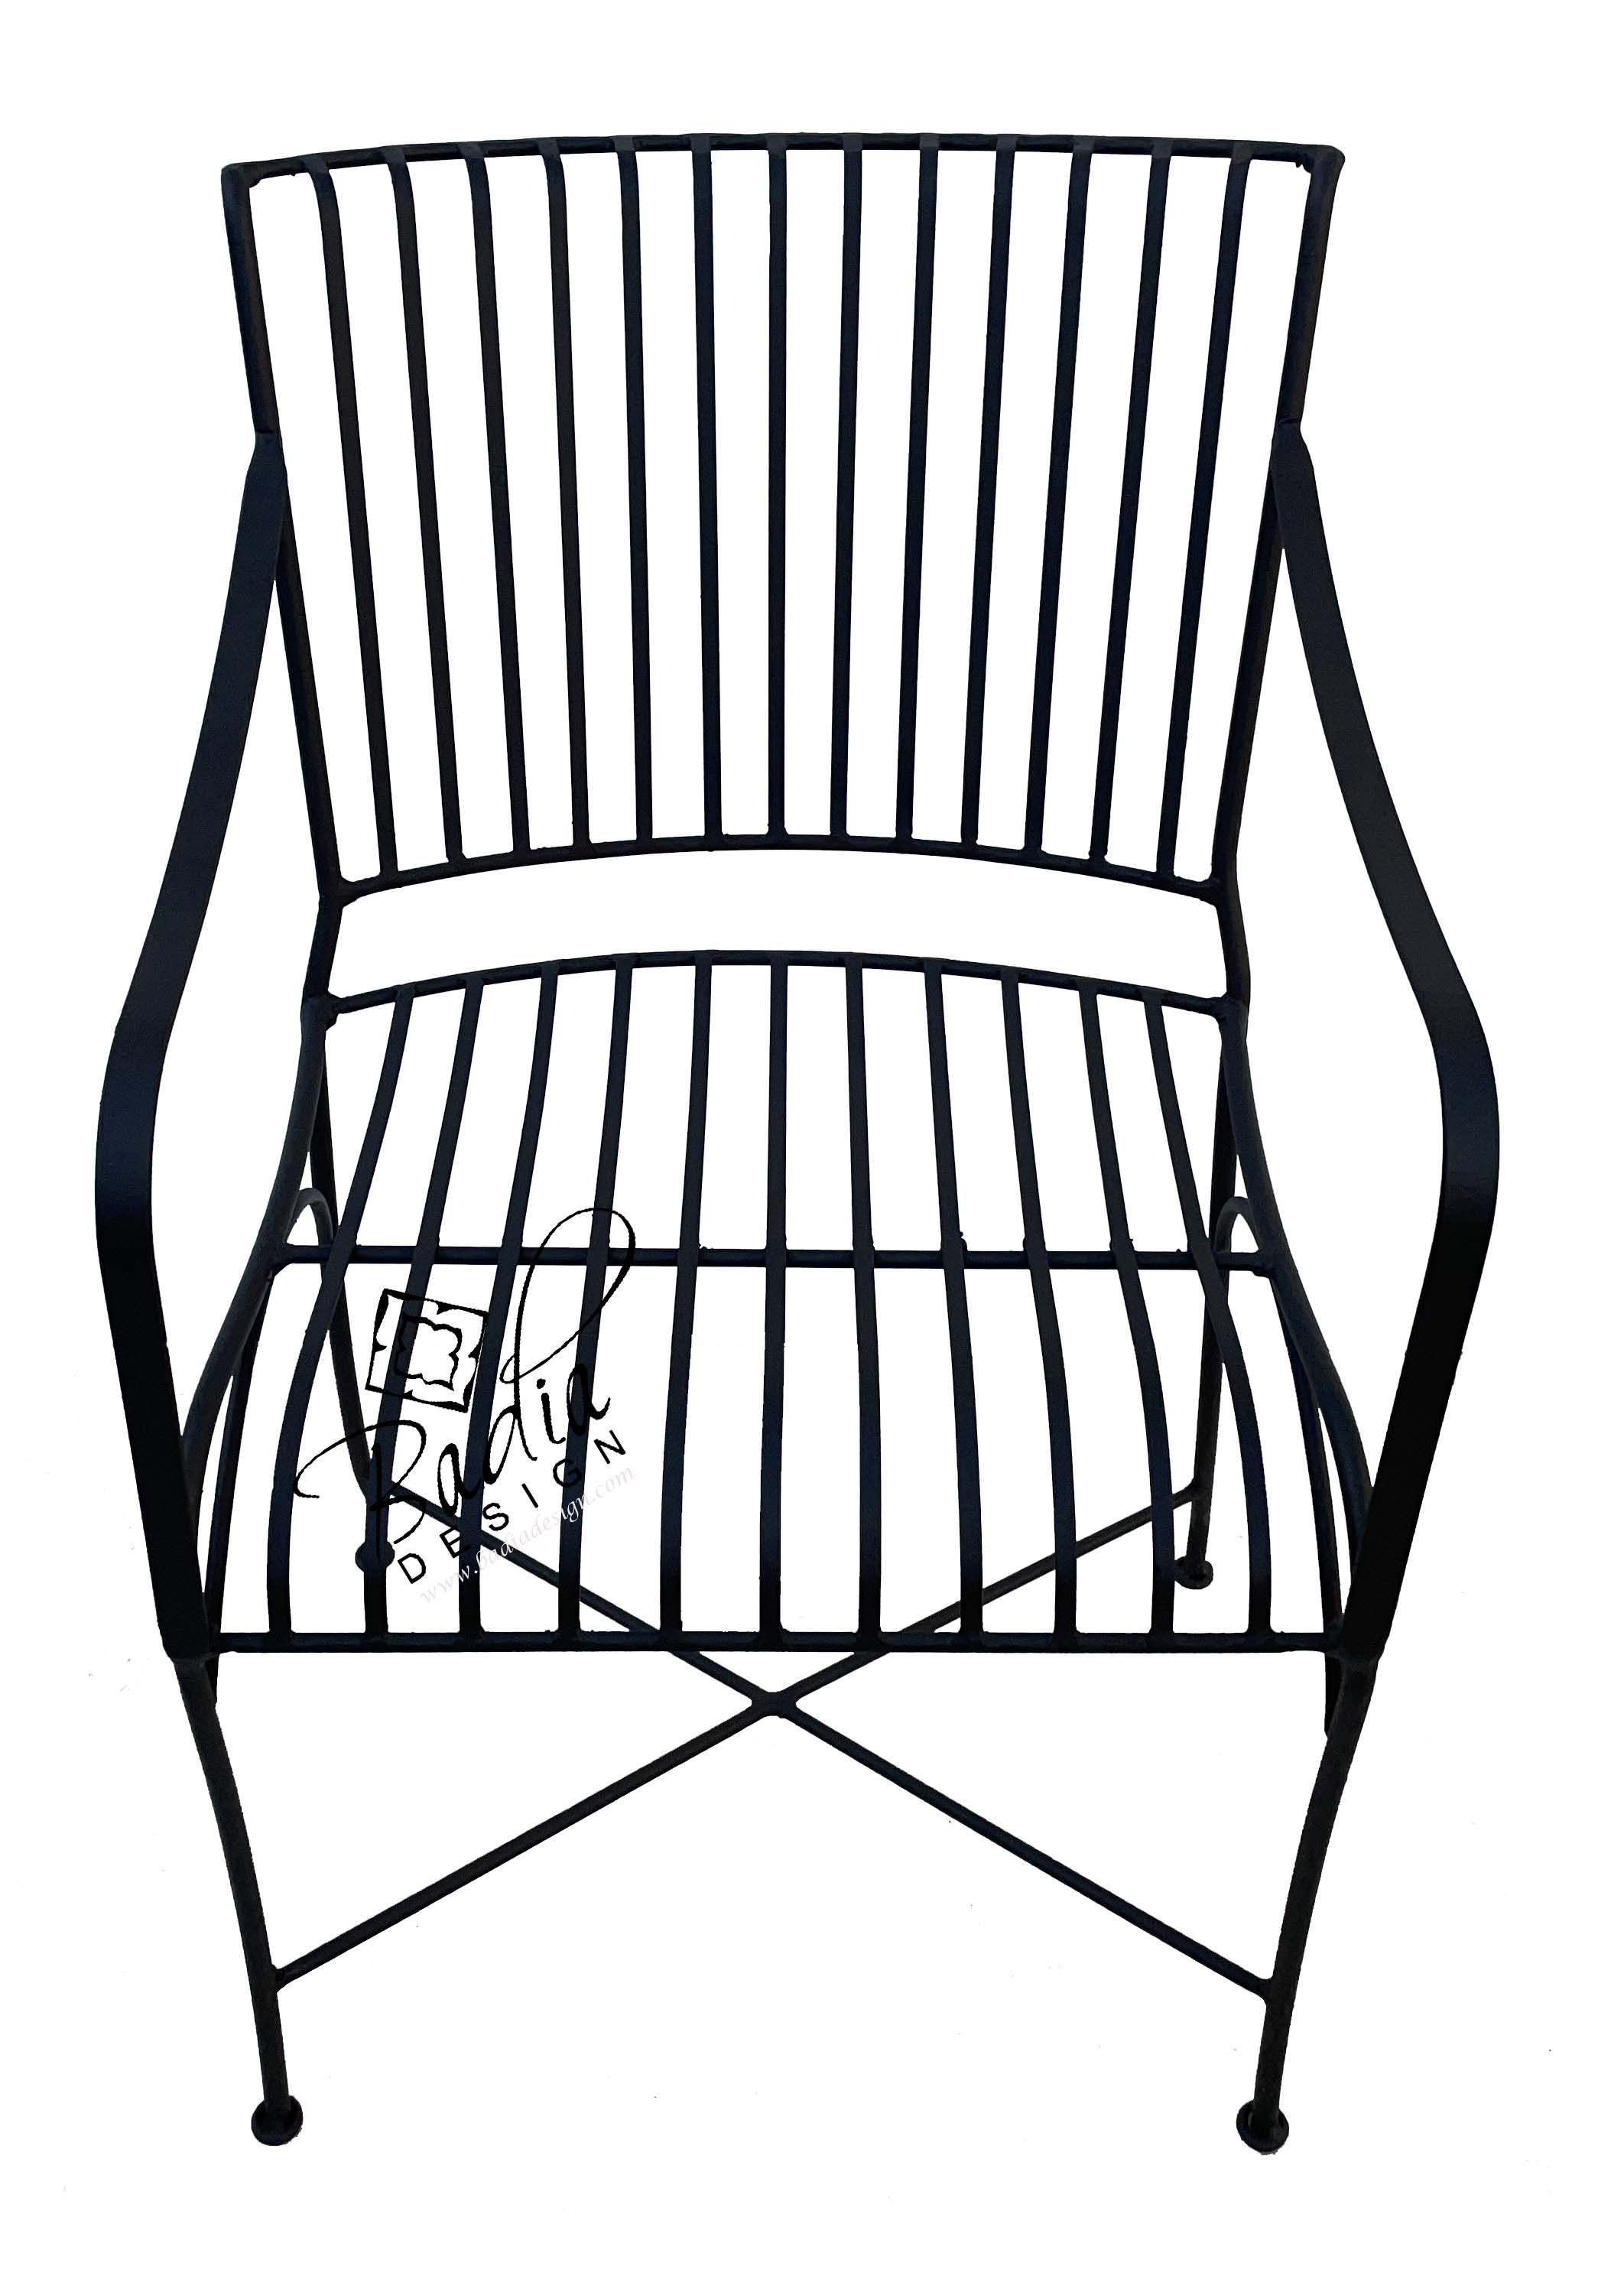 moroccan-wrought-iron-chair-outdoor-furniture-ic034.jpg